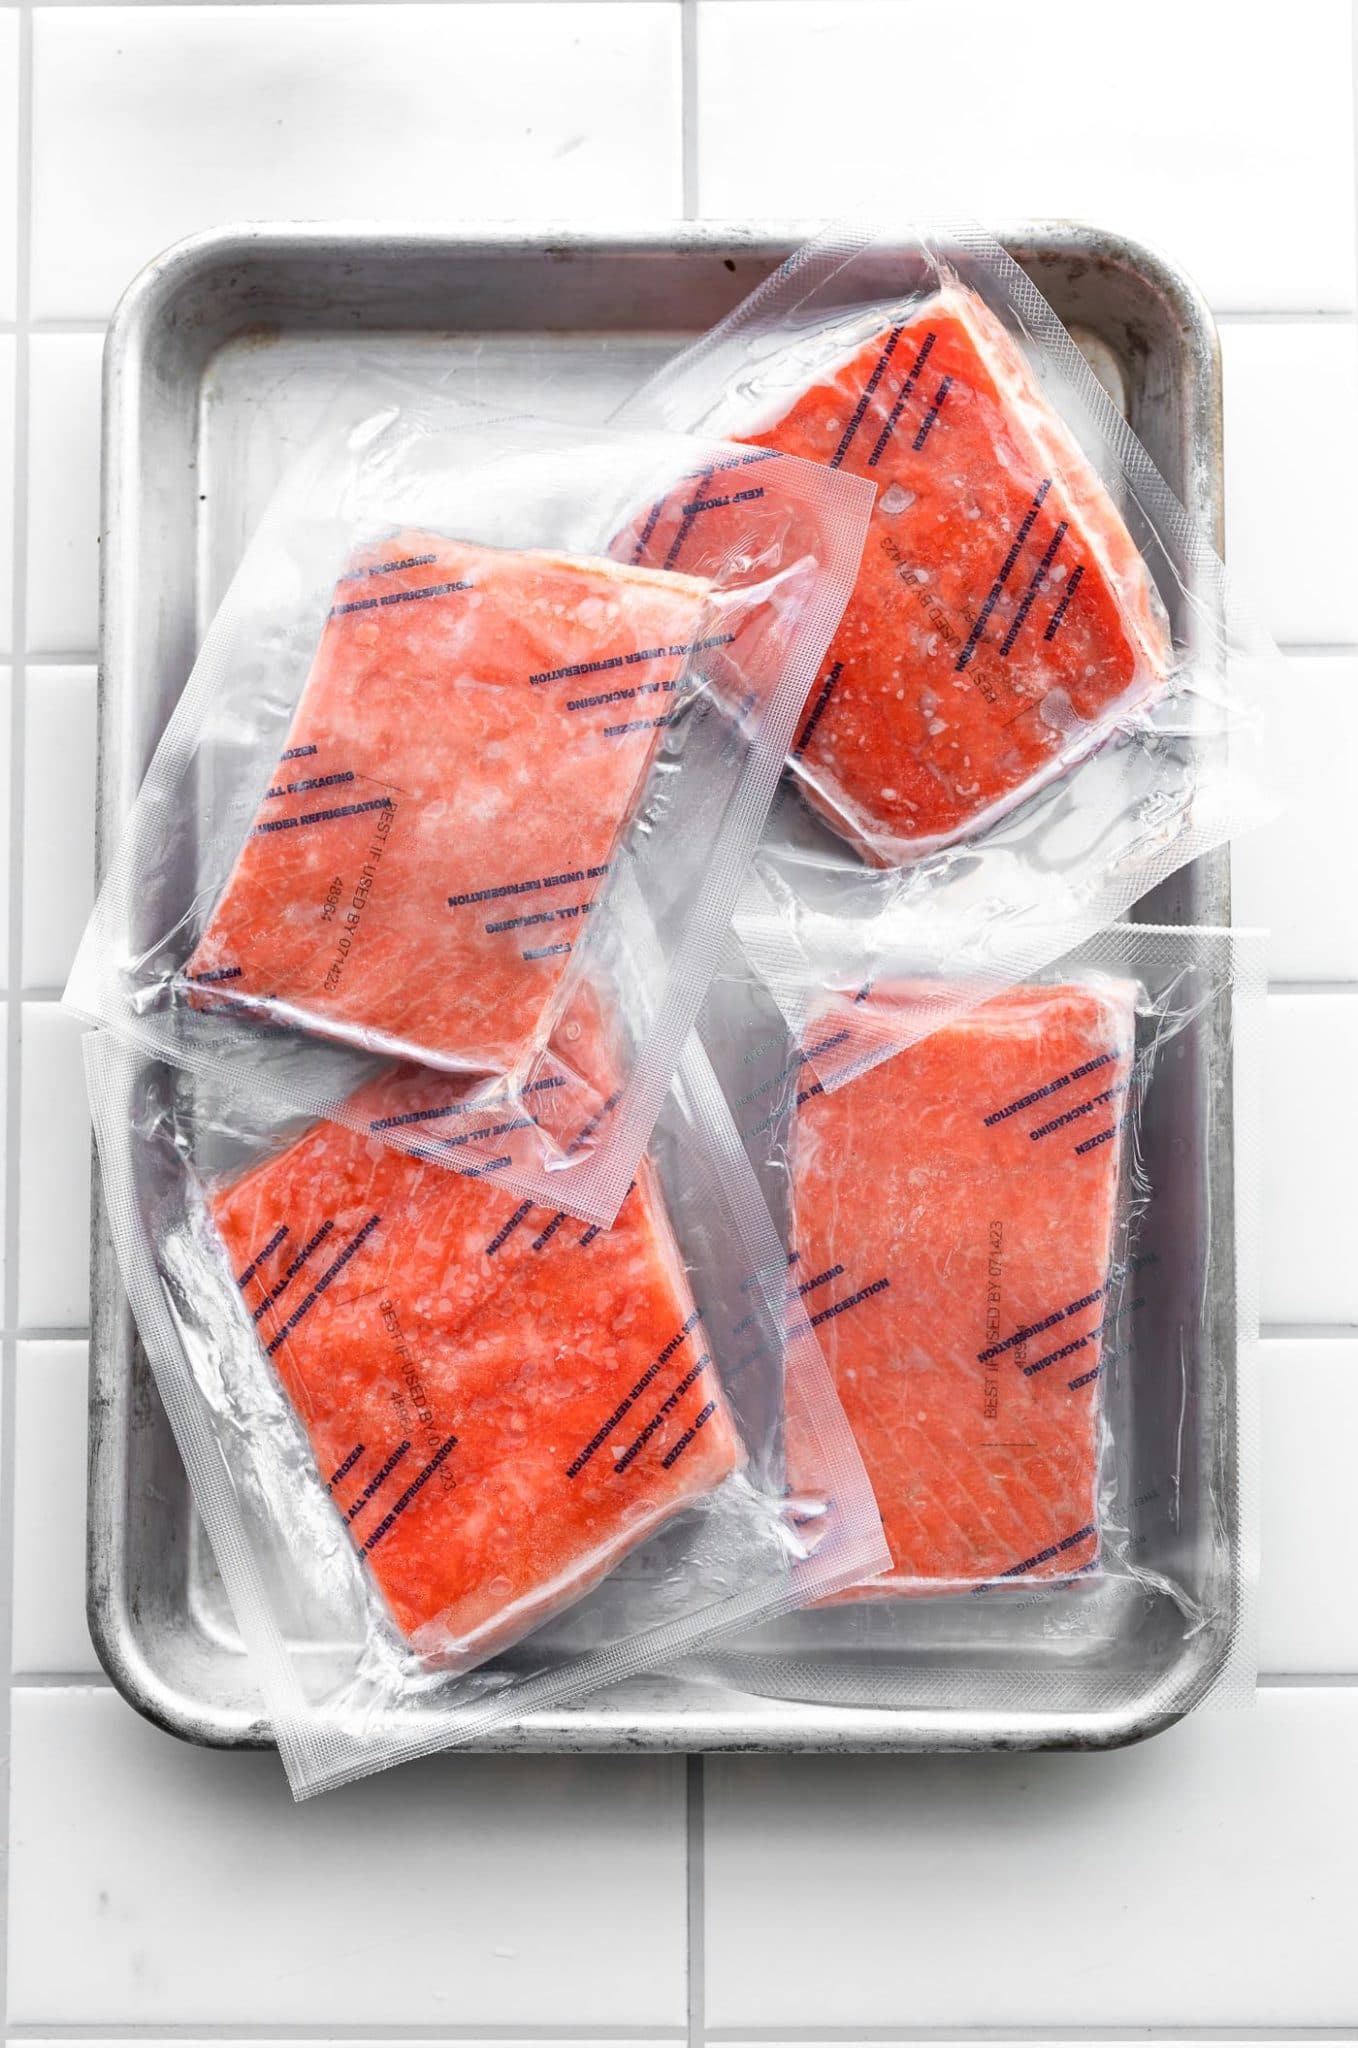 4 pieces of frozen salmon in individual sealed plastic bags sitting in a baking dish